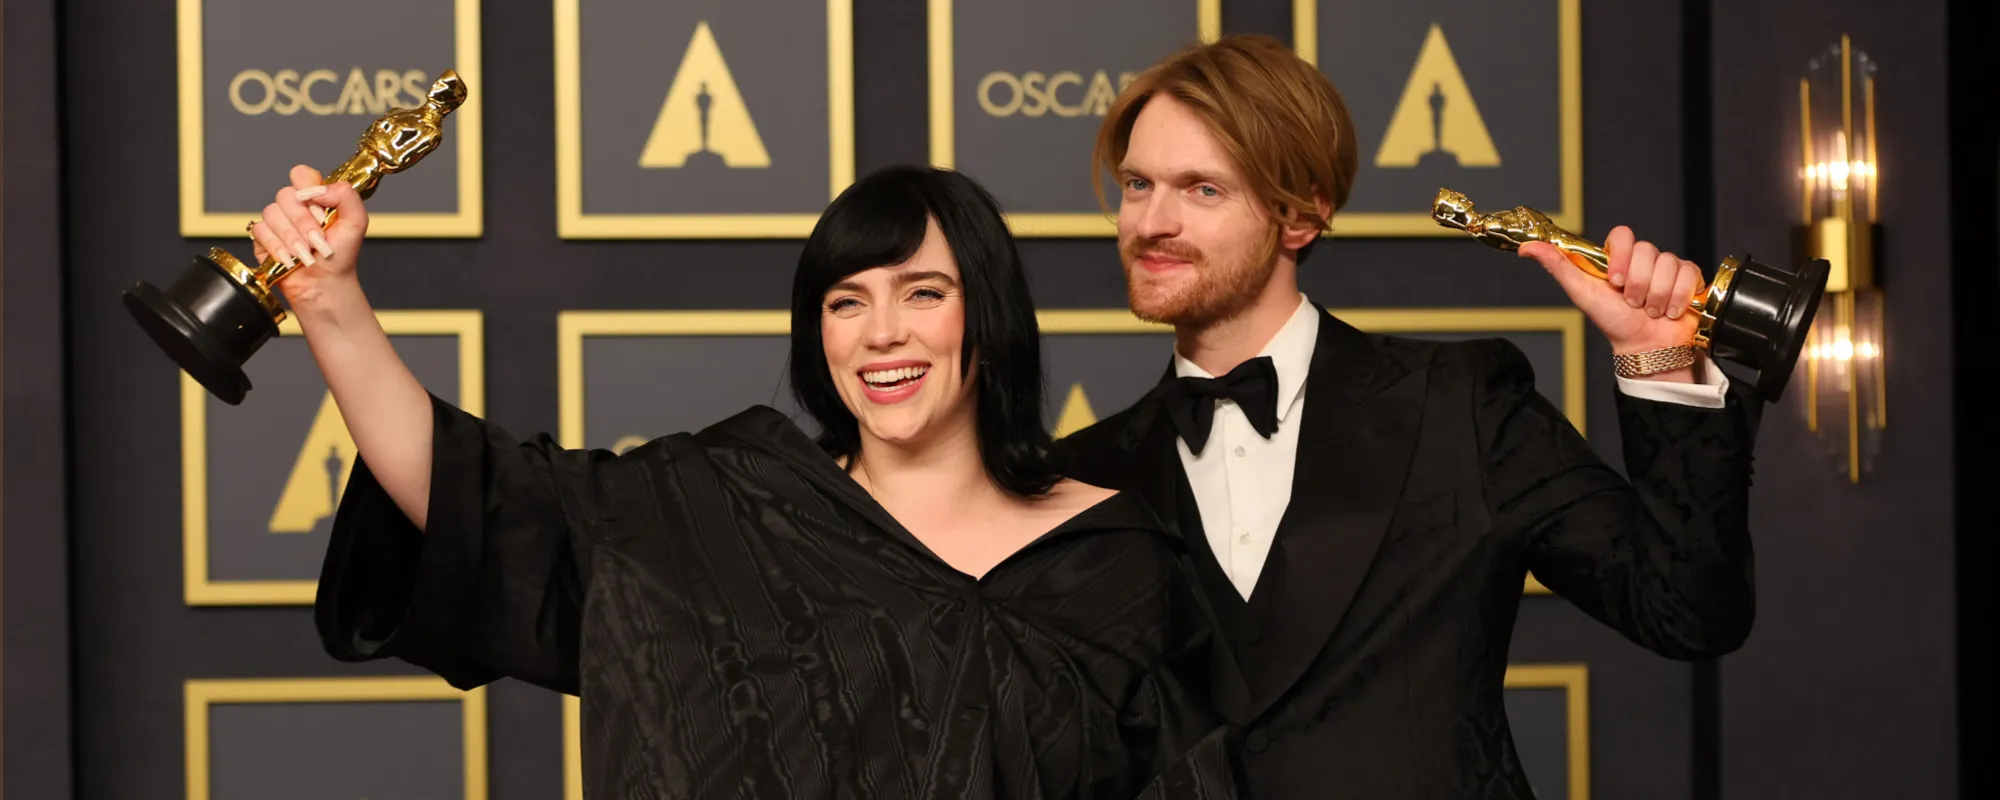 Billie Eilish and Finneas Win Oscar for Best Original Song for ‘007’ Theme Song “No Time to Die”